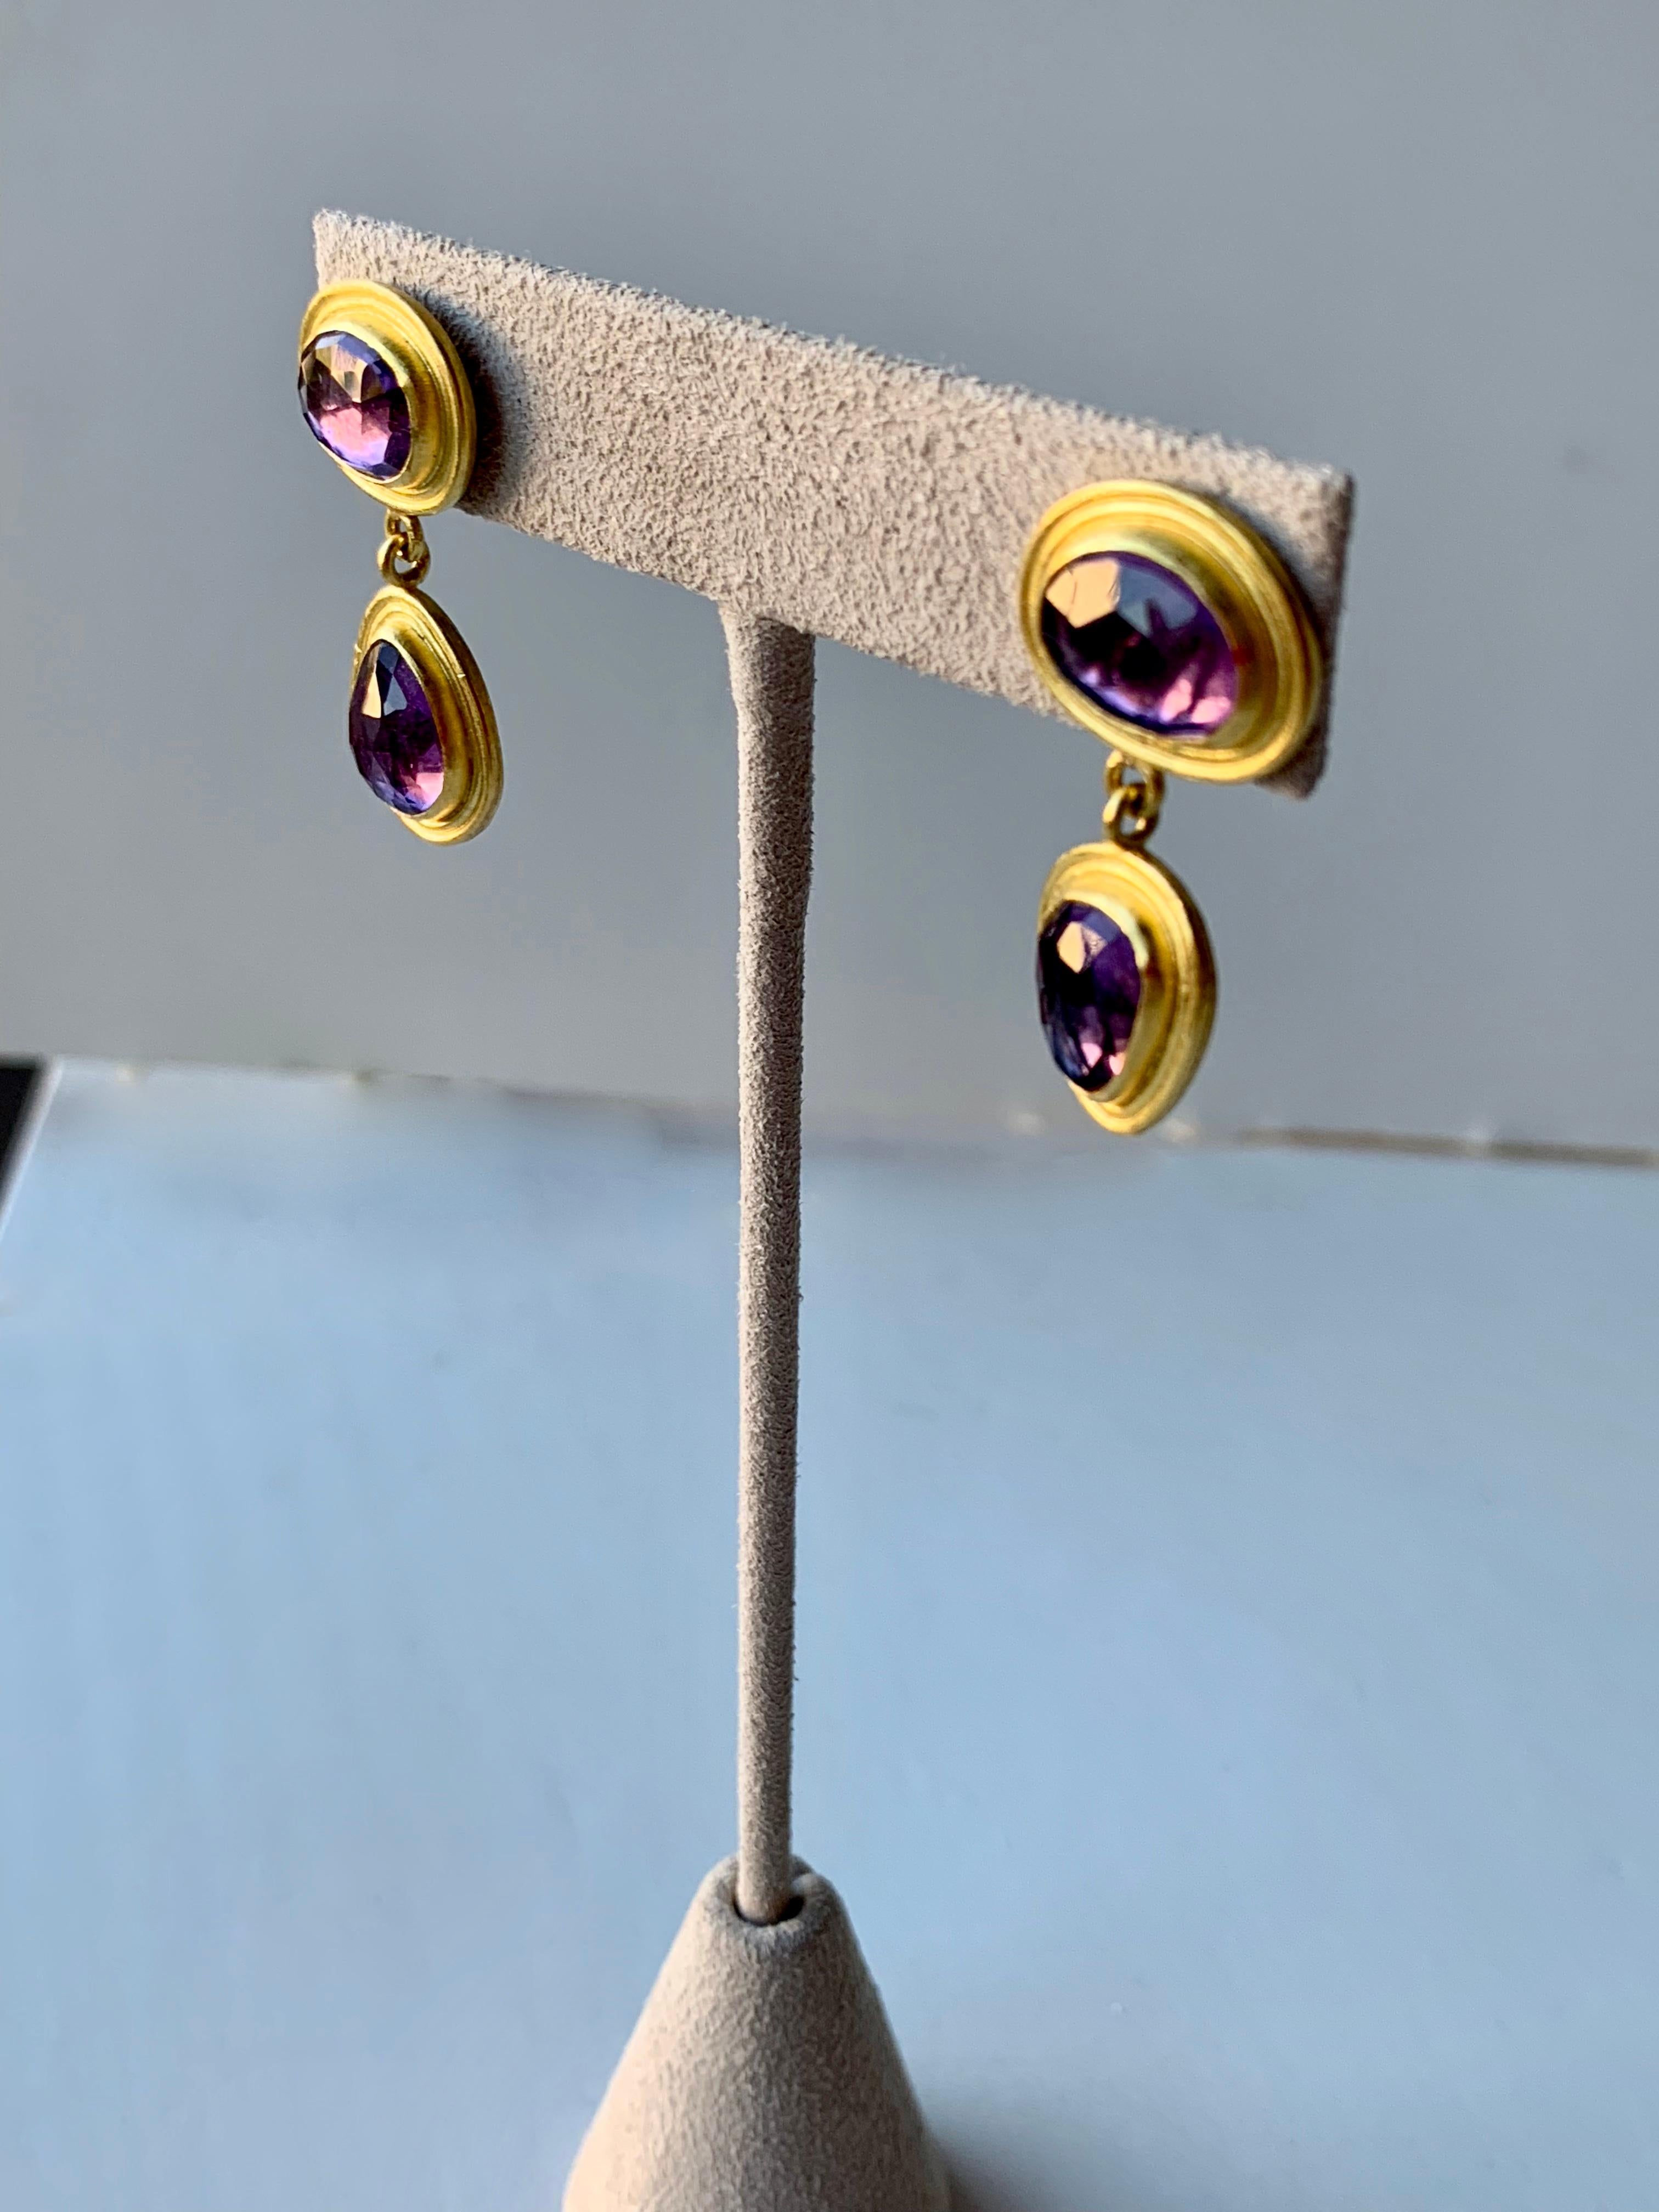 Amethysts were revered by the Ancient Greeks and Romans as a stone symbolizing luxury and were often highlighted as a part of their crowns, scepters, and rings. Free form Amethyst rose cut dangle earrings. Stones set in 22 karat gold with platinum